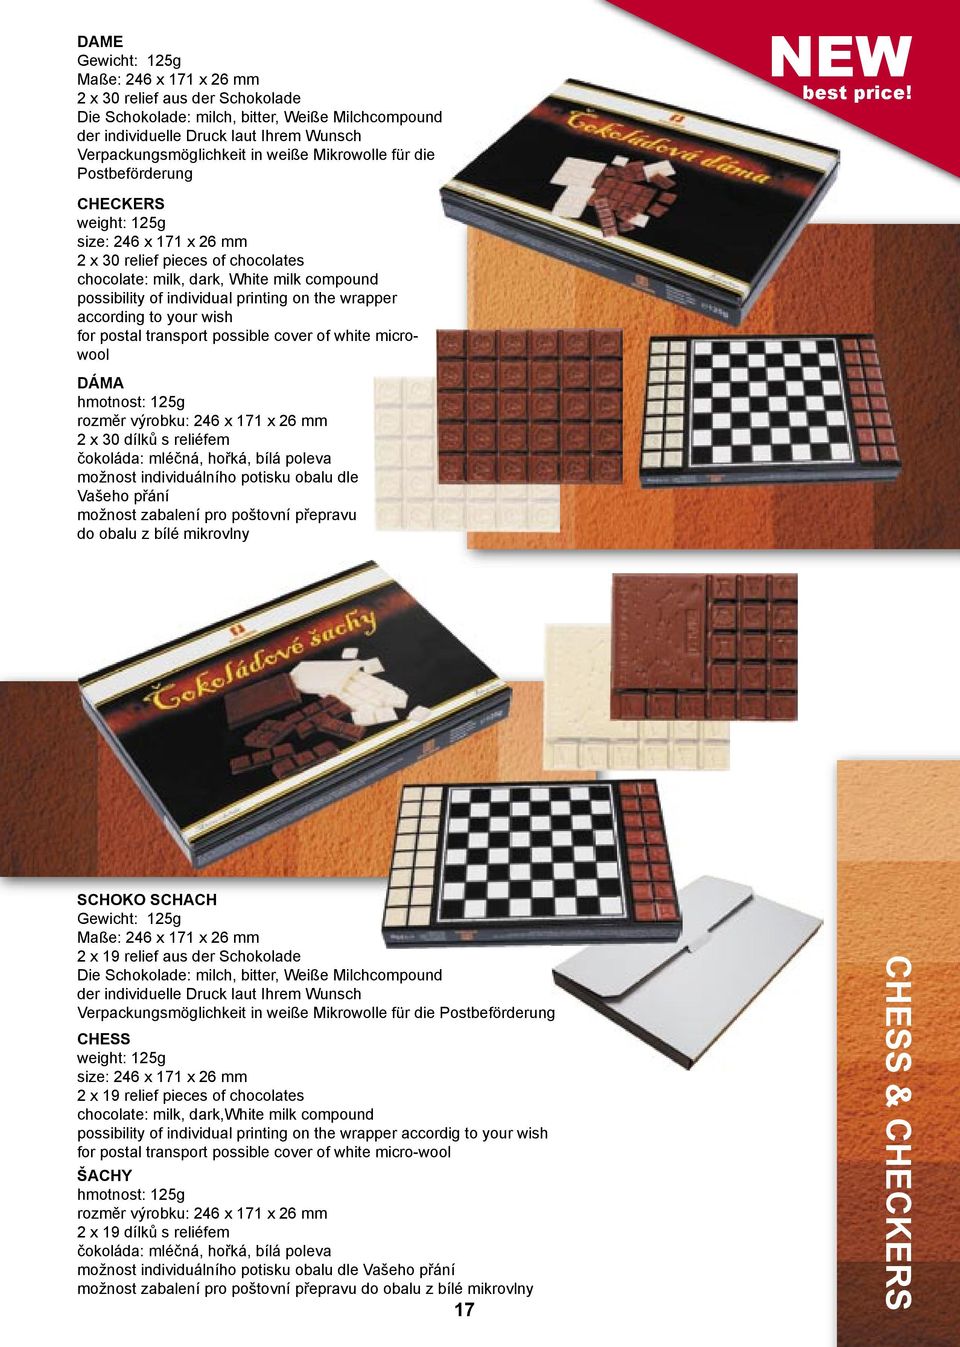 CHECKERS weight: 125g size: 246 x 171 x 26 mm 2 x 30 relief pieces of chocolates chocolate: milk, dark, White milk compound possibility of individual printing on the wrapper according to your wish